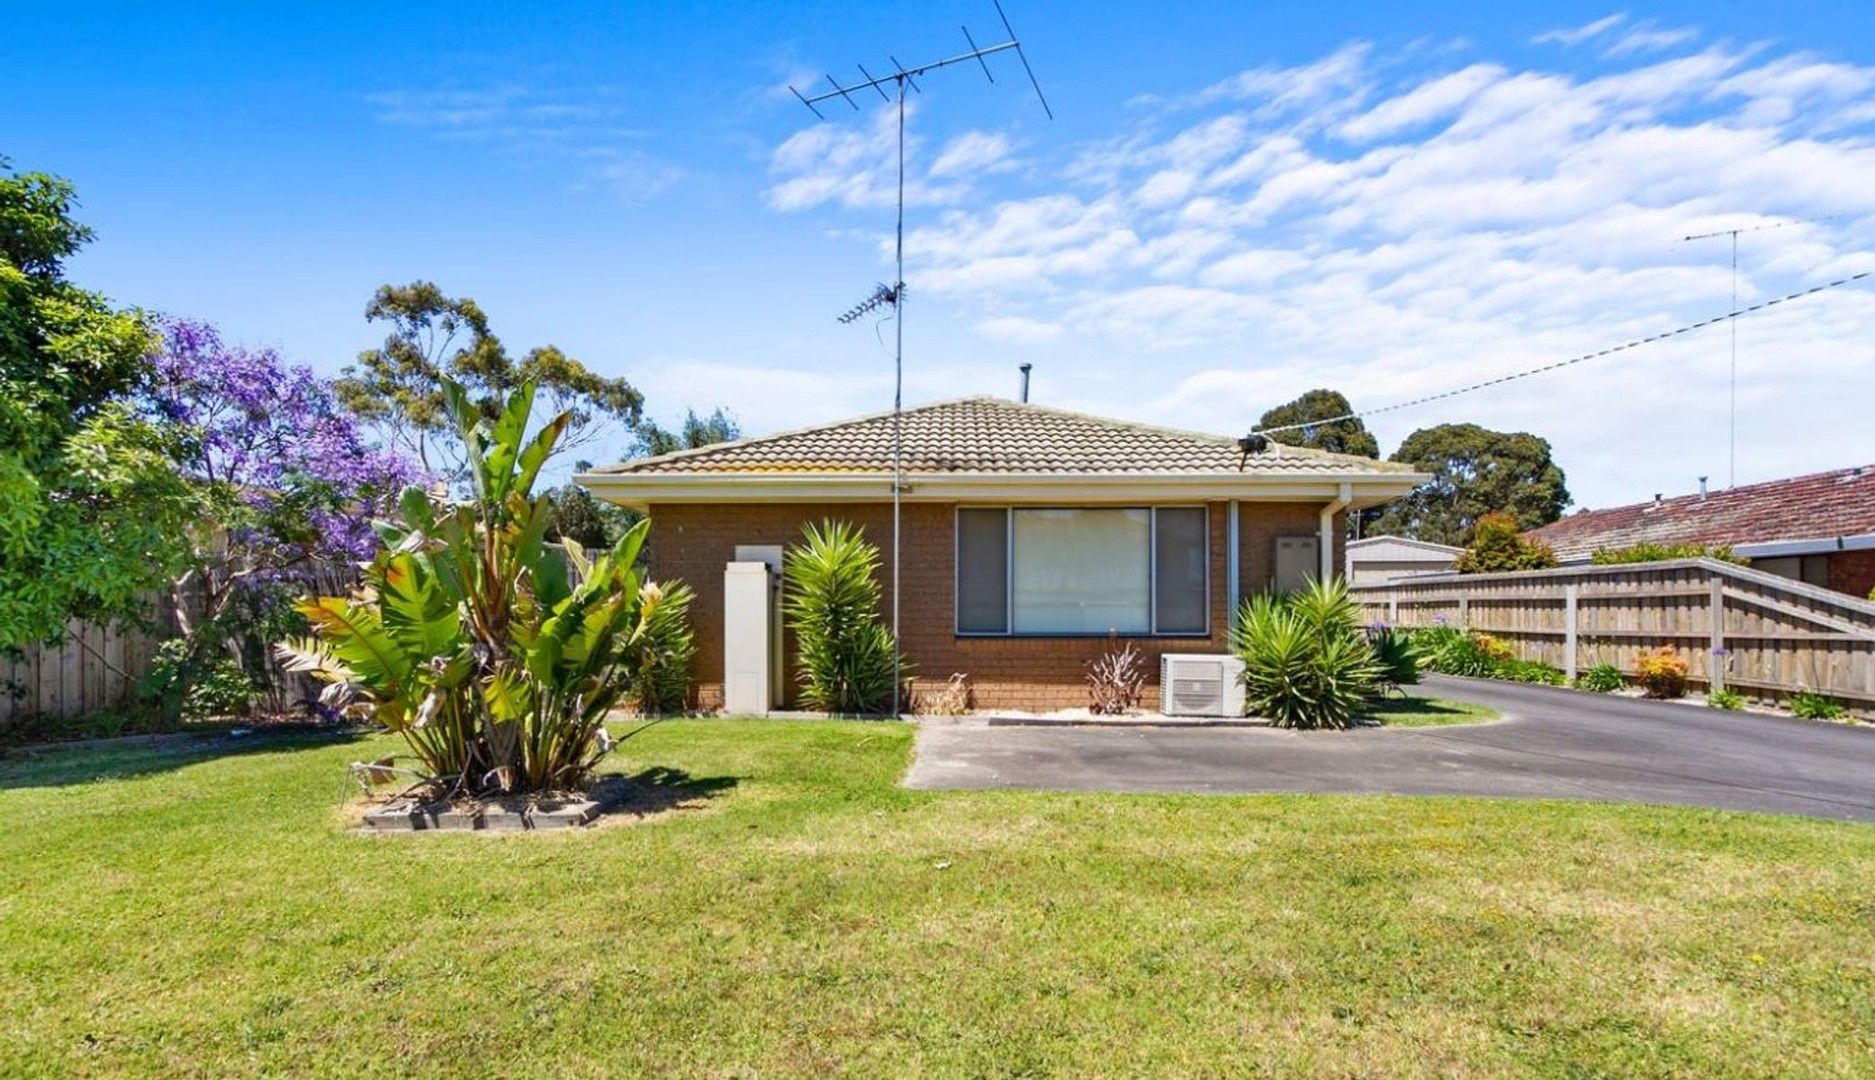 1/34 Spring Court, Morwell VIC 3840, Image 0